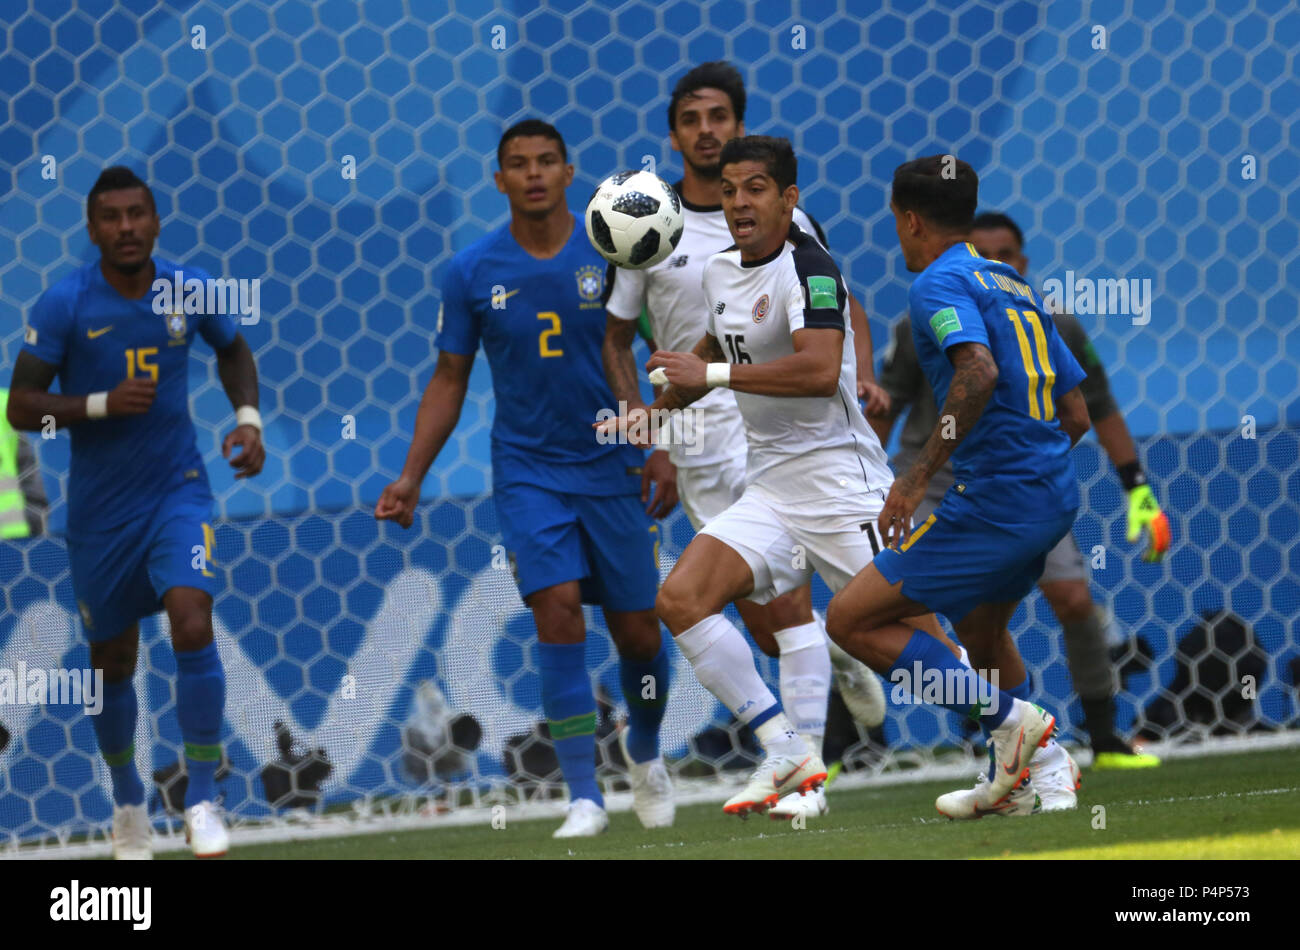 Saint Petersburg, Russia. 22nd June 2018. CRISTIAN GAMBOA  in action during the Fifa World Cup Russia 2018, Group E, football match between BRAZIL V COSTARICA  in Brazil vs Costa Rica, Saint Petersburg Stadium. Credit: marco iacobucci/Alamy Live News Stock Photo